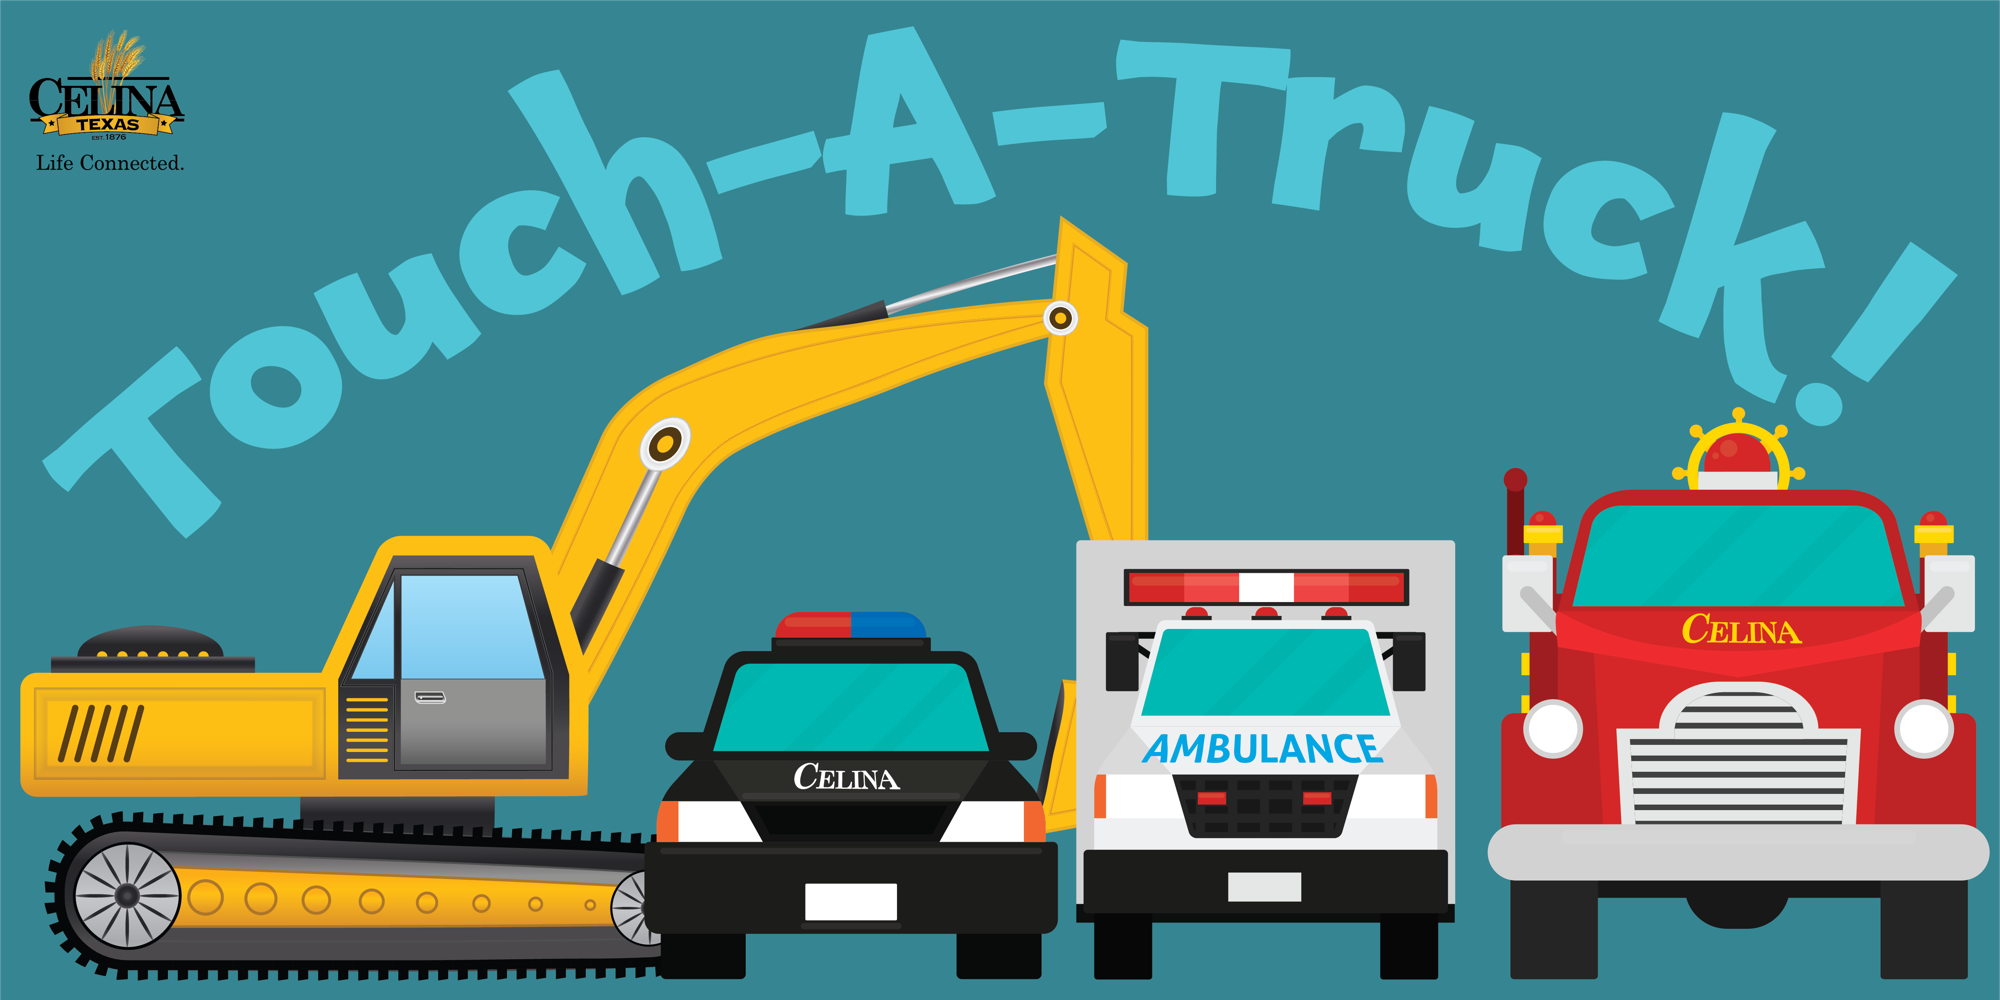 Touch-A-Truck promotional image